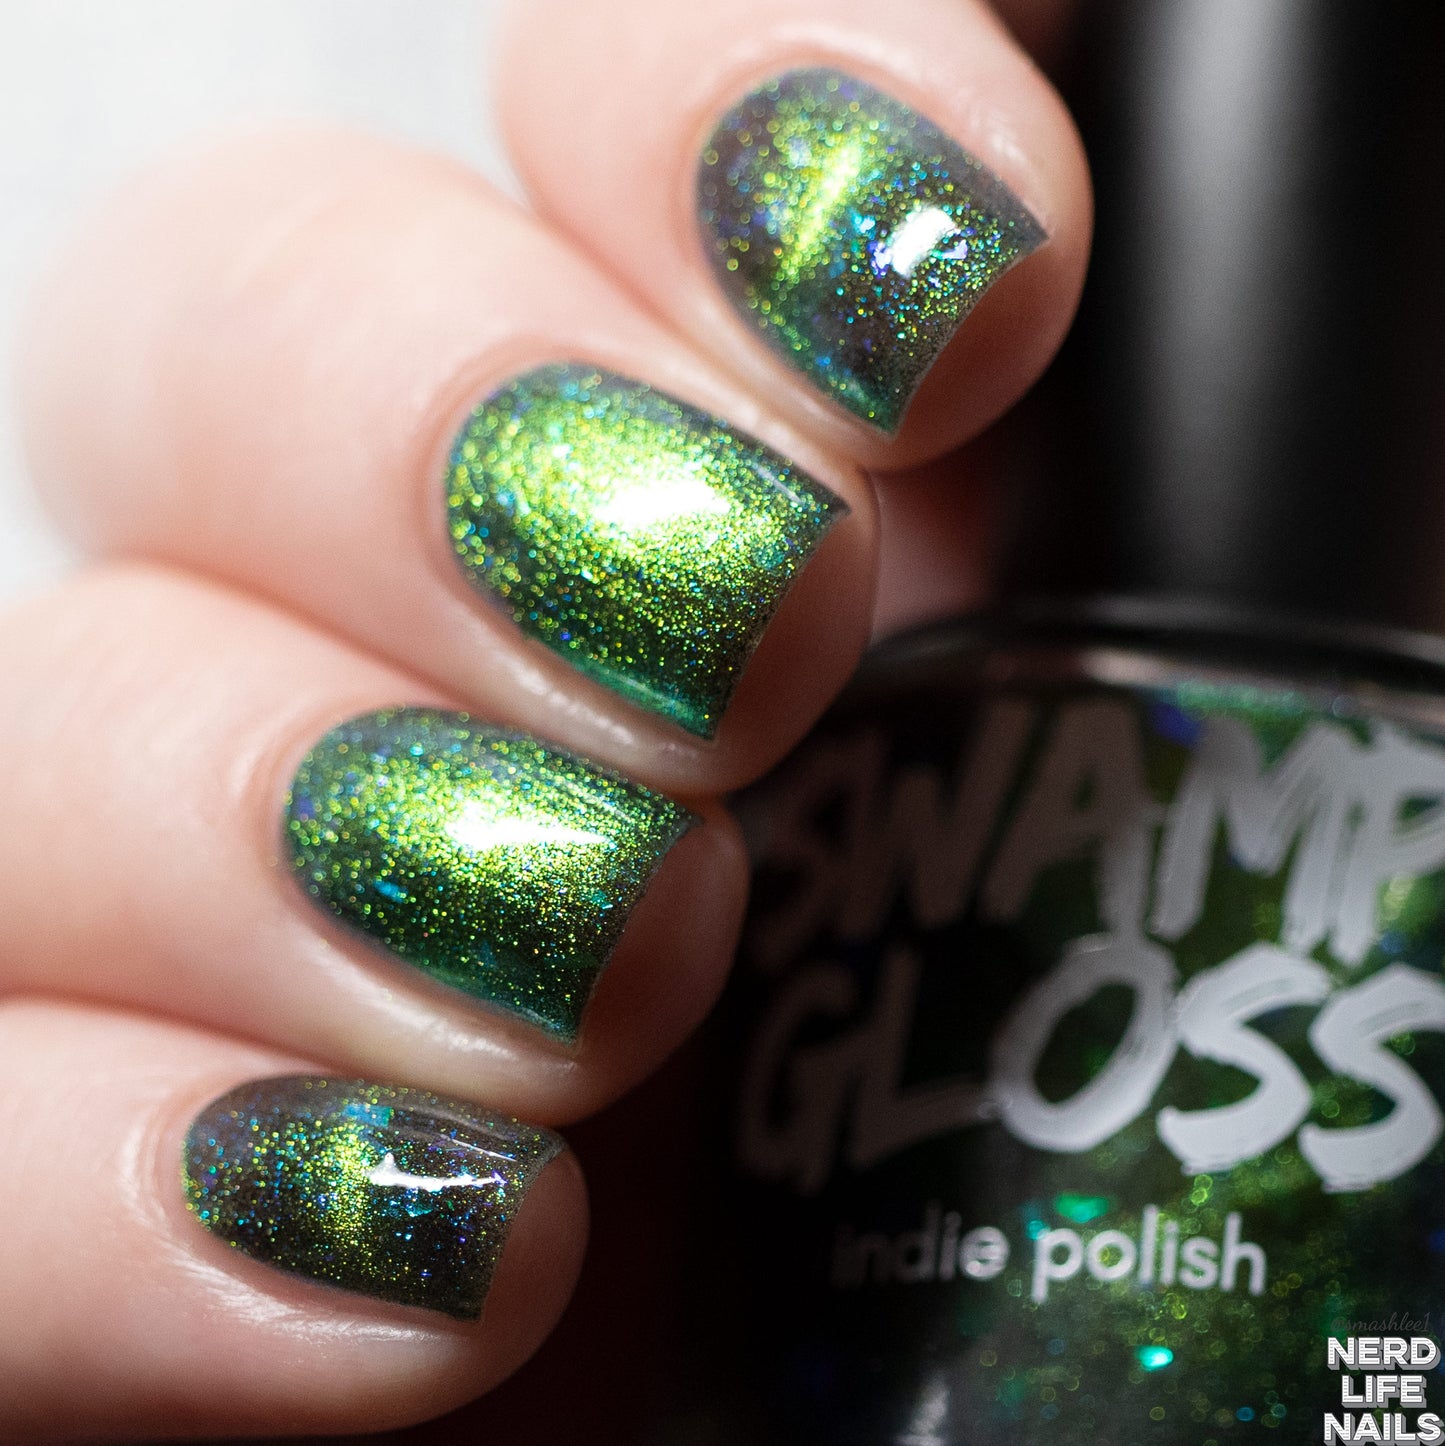 indie polish, swamp gloss, multichrome, gold, green, blue, flakies